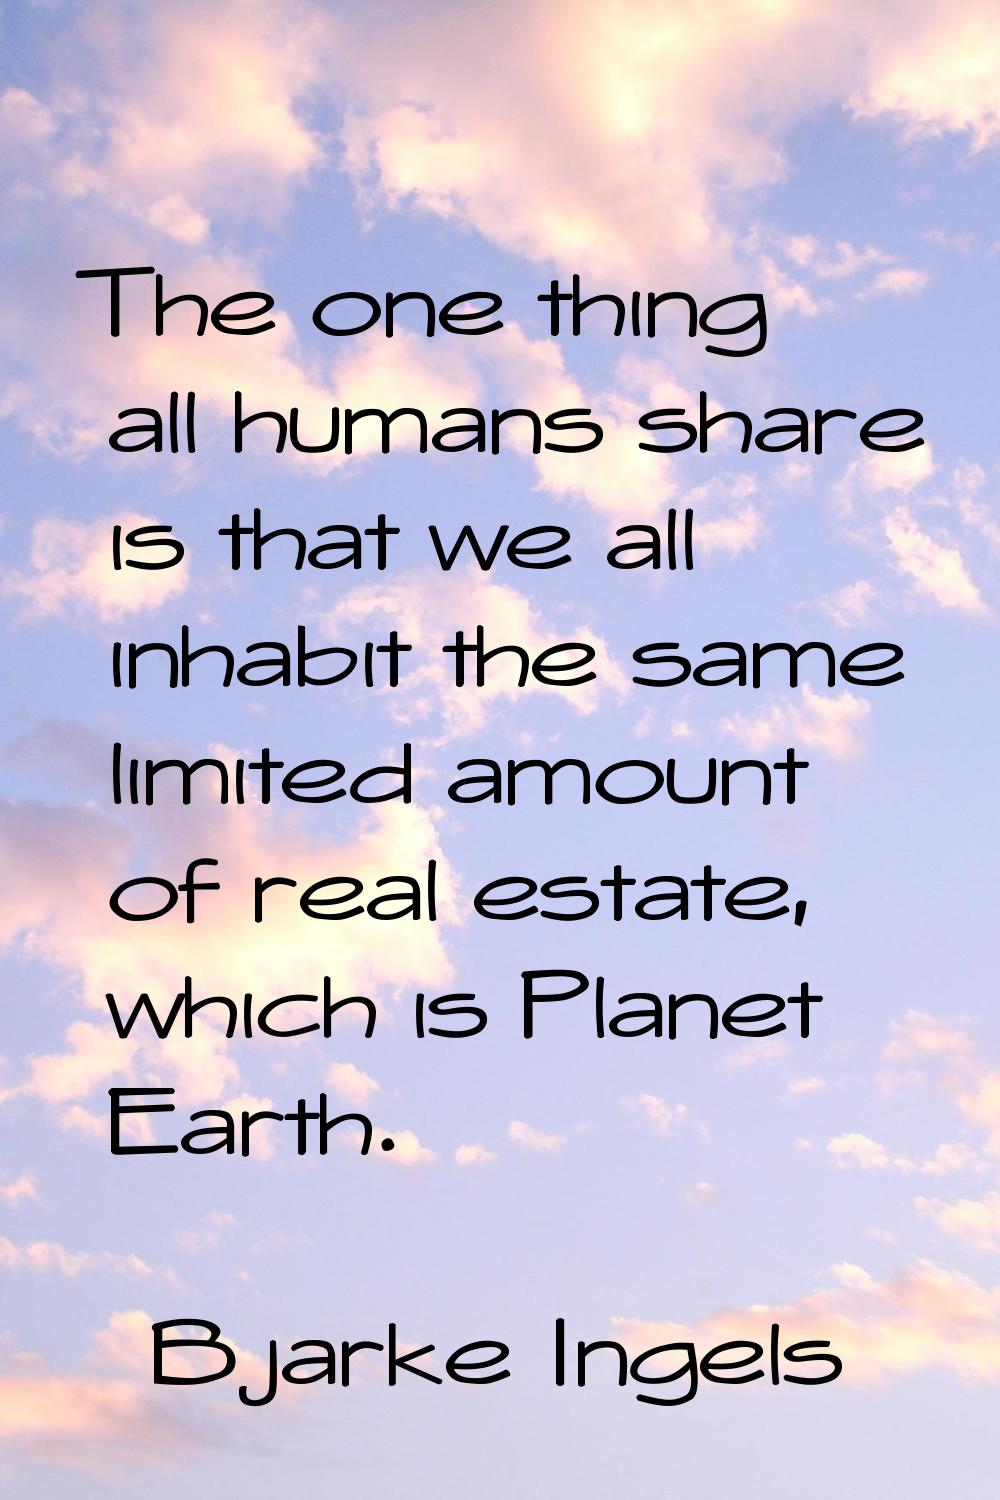 The one thing all humans share is that we all inhabit the same limited amount of real estate, which